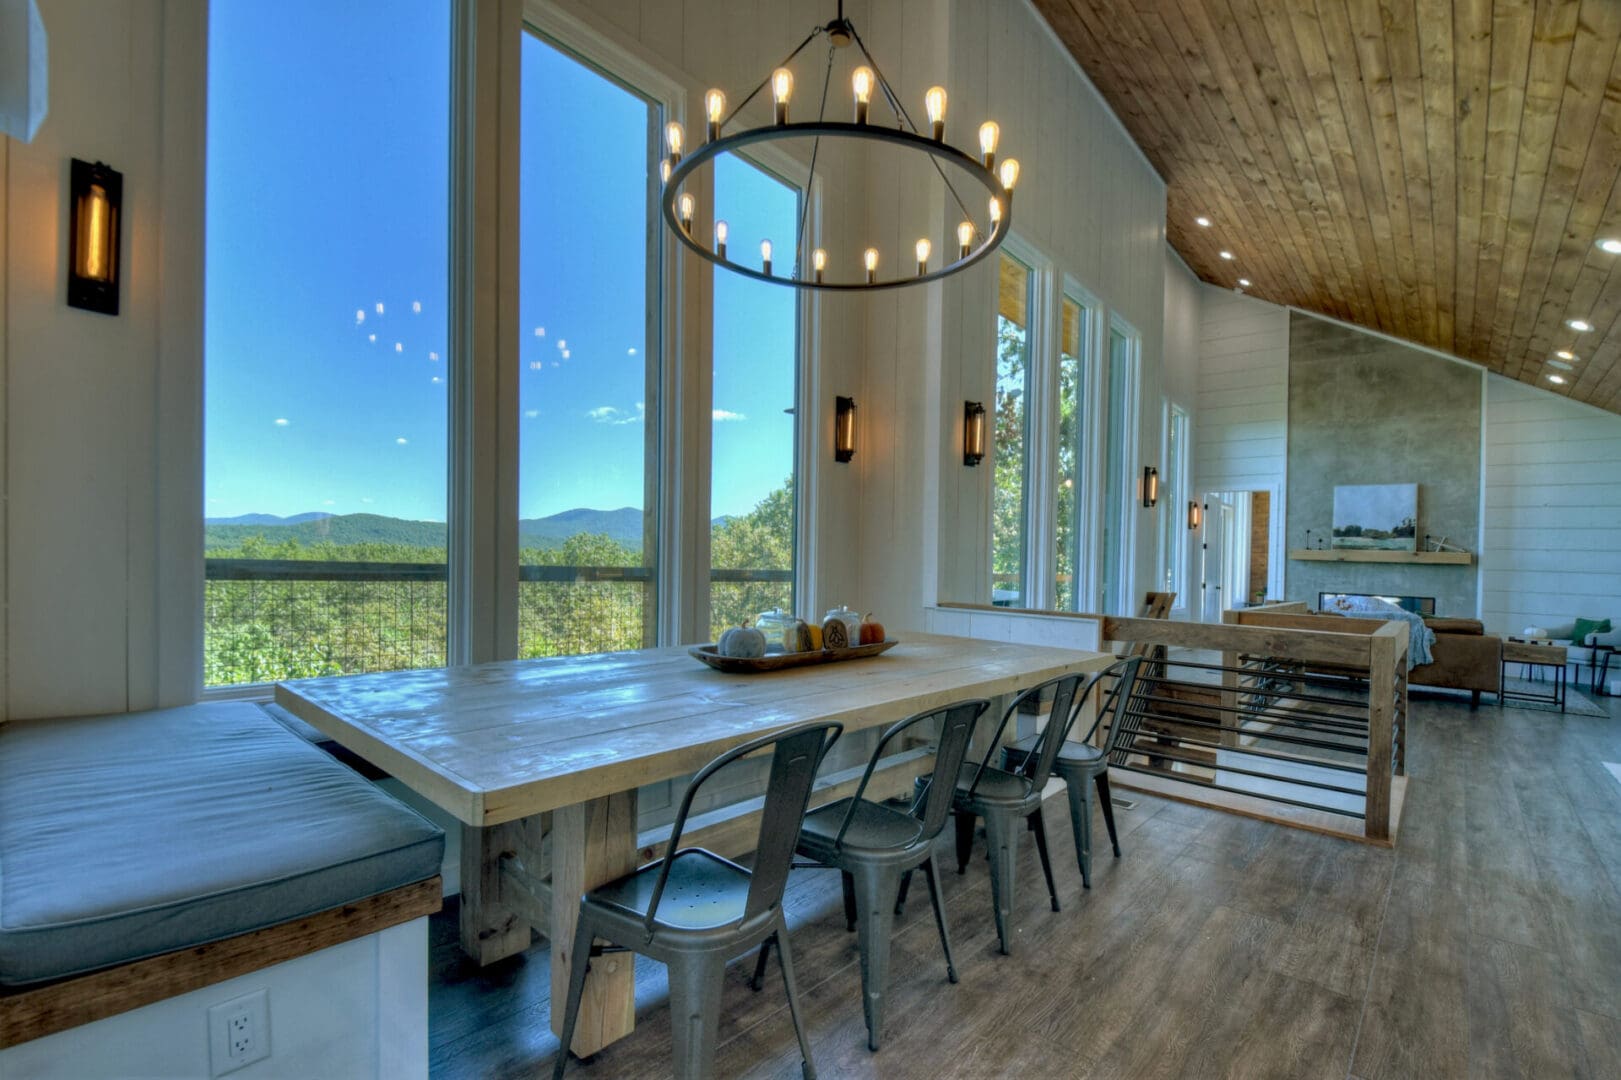 A dining room with a large window overlooking the mountains, provided by Architectural Design services.